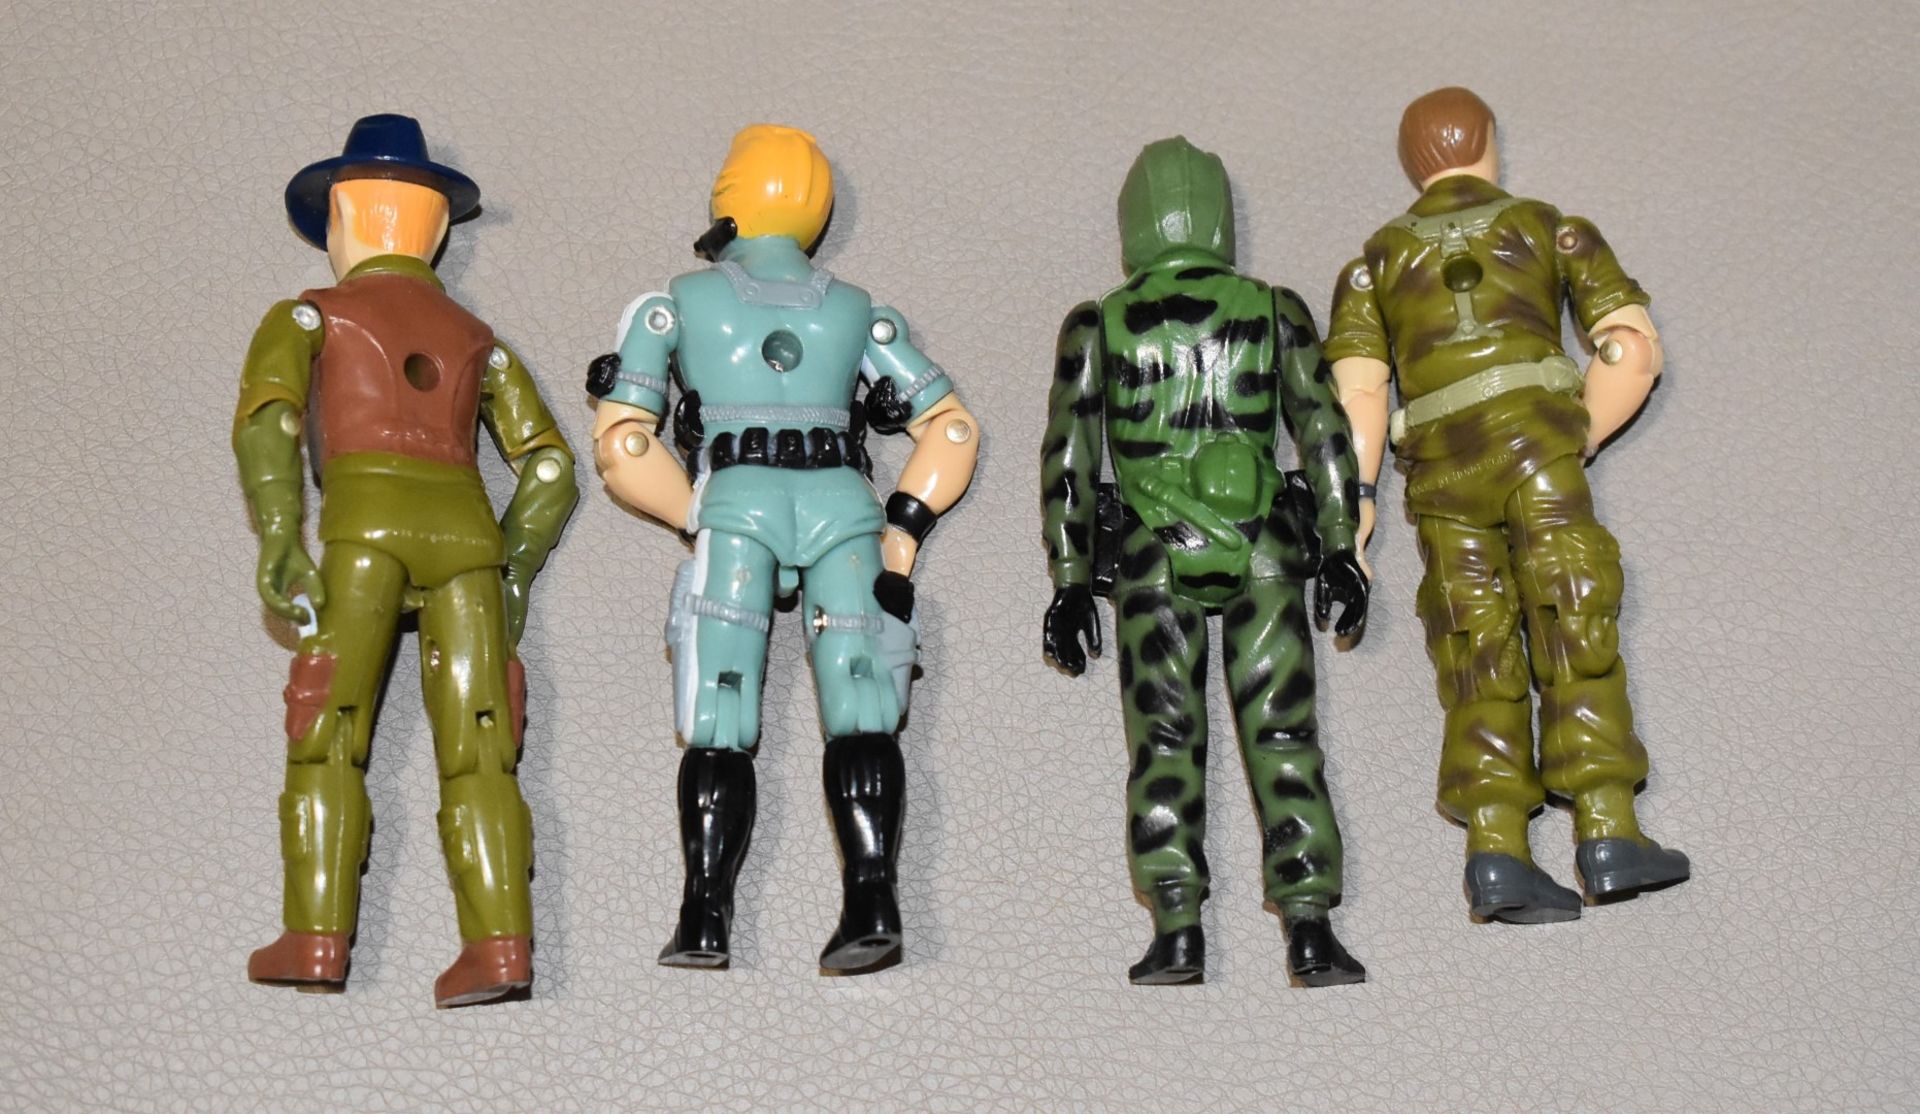 4 x Vintage Action Force Figures and Jeep - Vintage Figures in Very Good Condition - Image 3 of 3